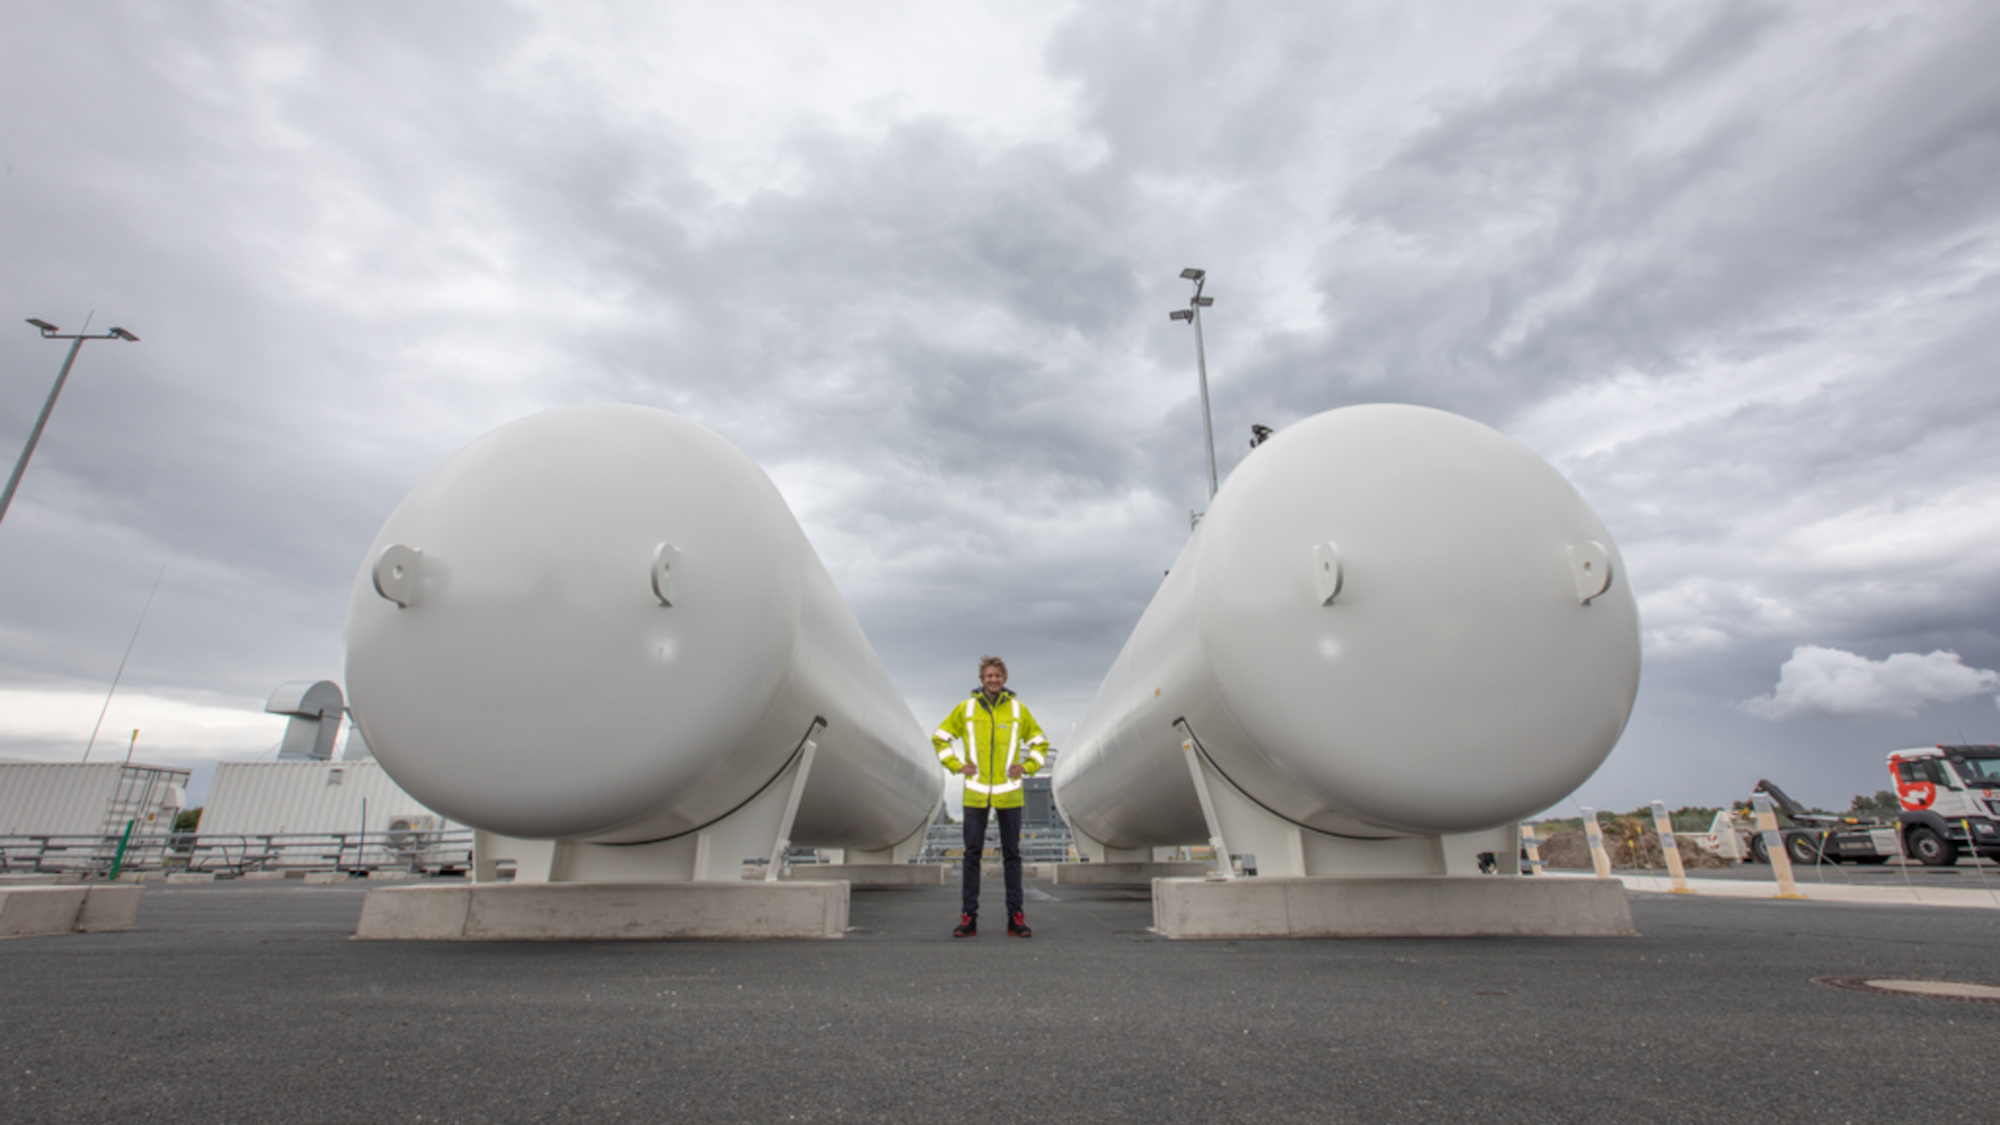 Jannes Vervoort is standing between two elongated tanks, in which green hydrogen is stored